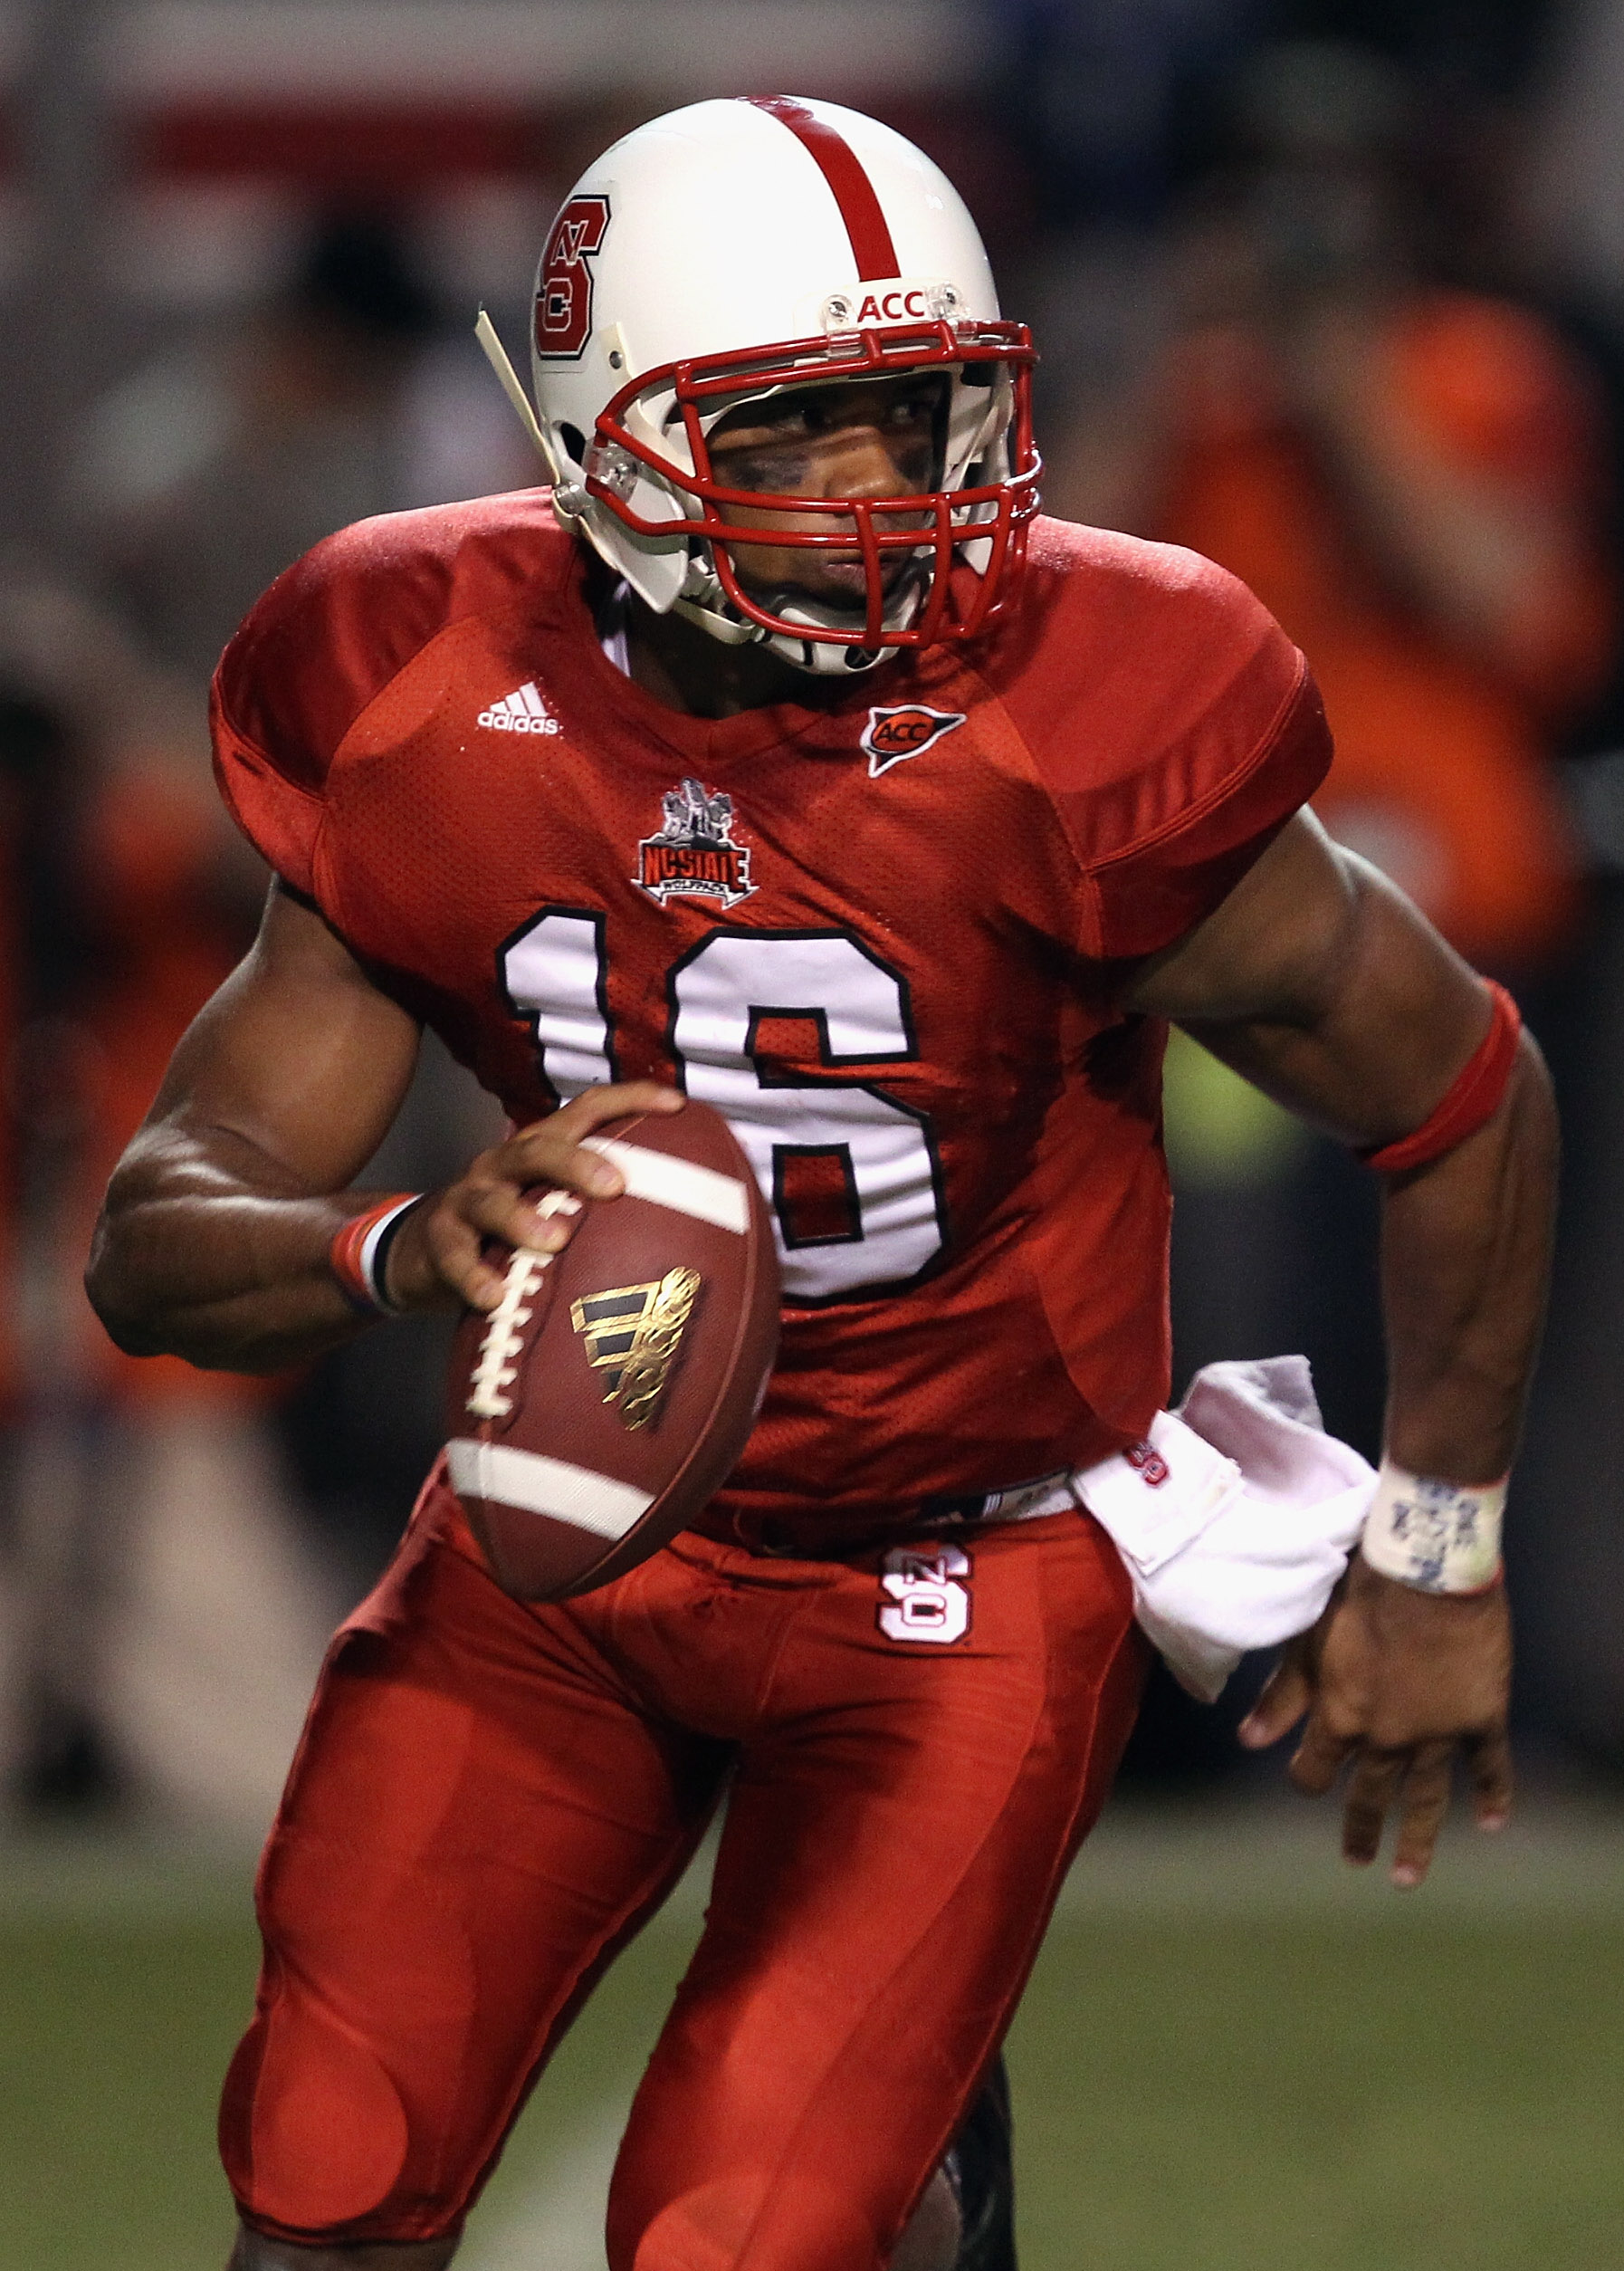 RALEIGH, NC - SEPTEMBER 16:  Russell Wilson #16 of the North Carolina State Wolfpack runs with the ball against the Cincinnati Bearcats during their game at Carter-Finley Stadium on September 16, 2010 in Raleigh, North Carolina.  (Photo by Streeter Lecka/